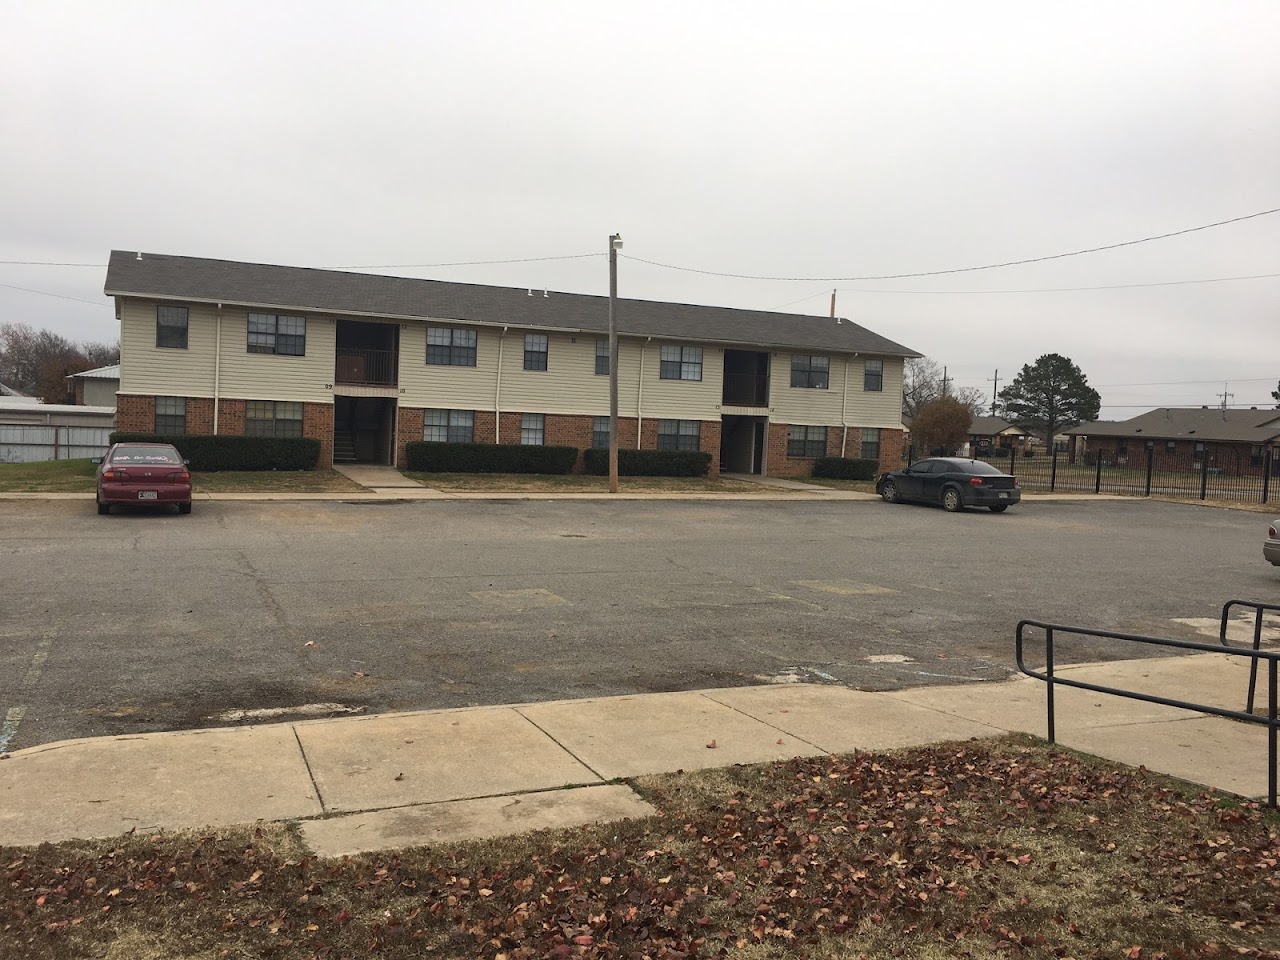 Photo of SUNSET VILLAGE APTS. Affordable housing located at 1300 S WALKER DR ATOKA, OK 74525